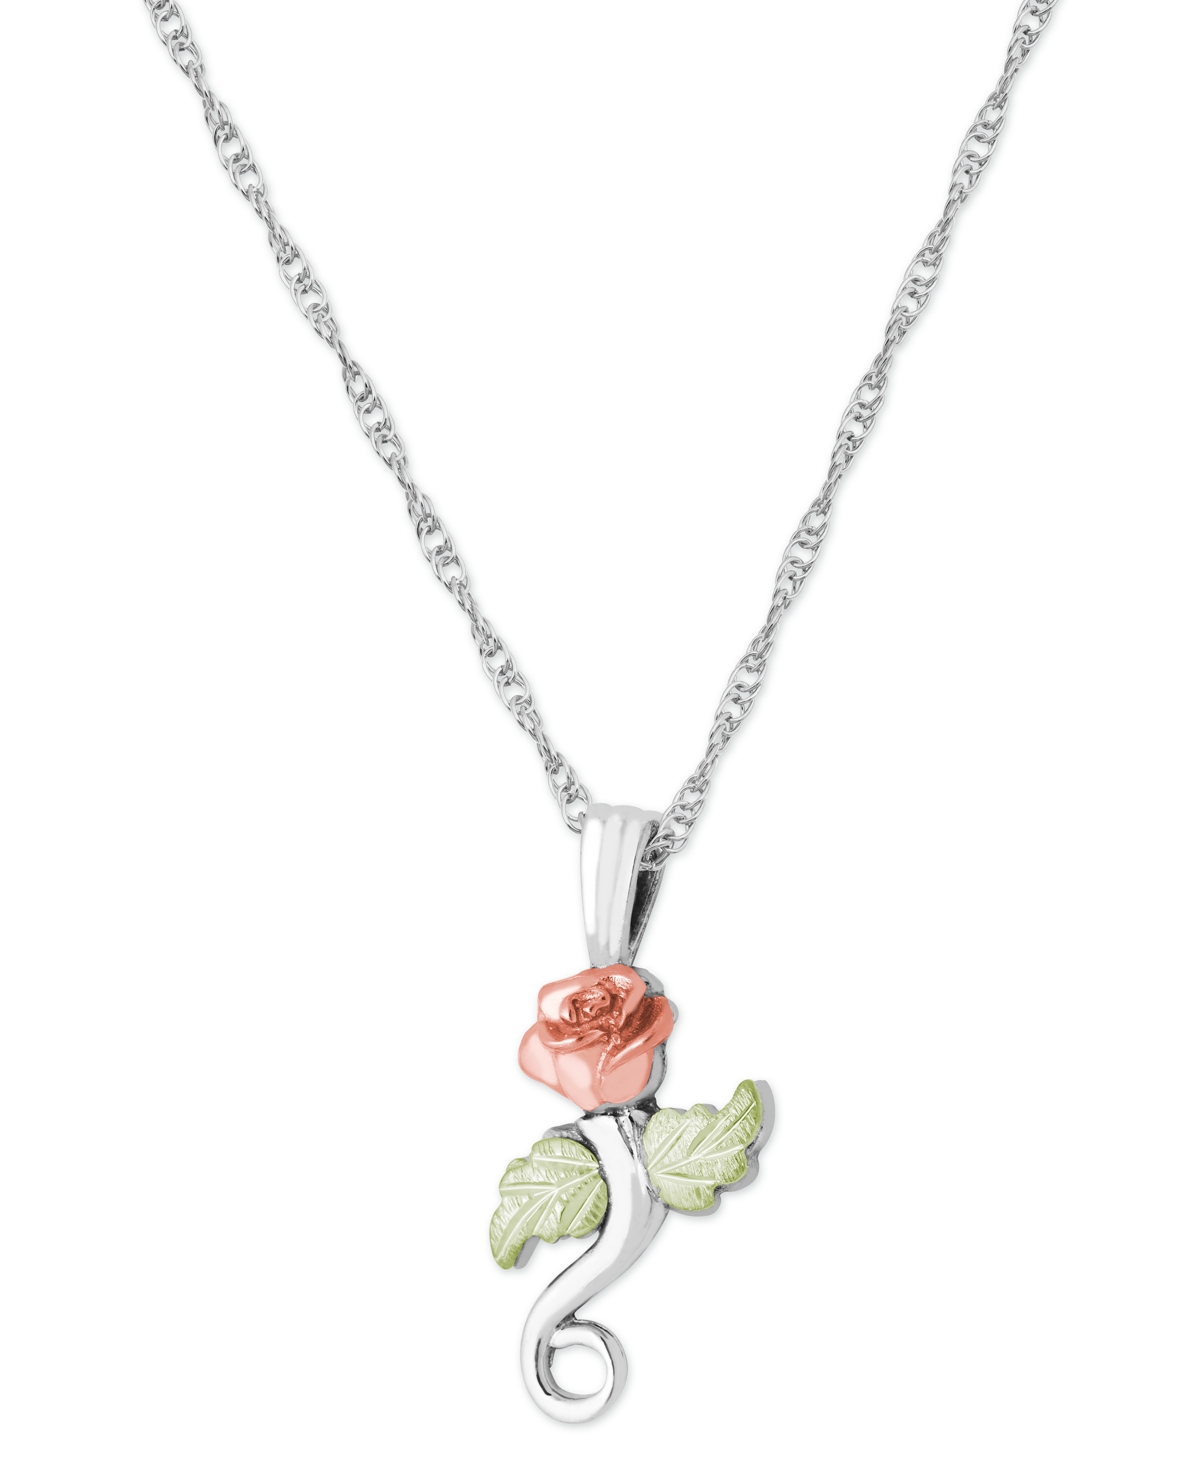 Rose Pendant 18" Necklace in Sterling Silver with 12K Rose and Green Gold - Silver